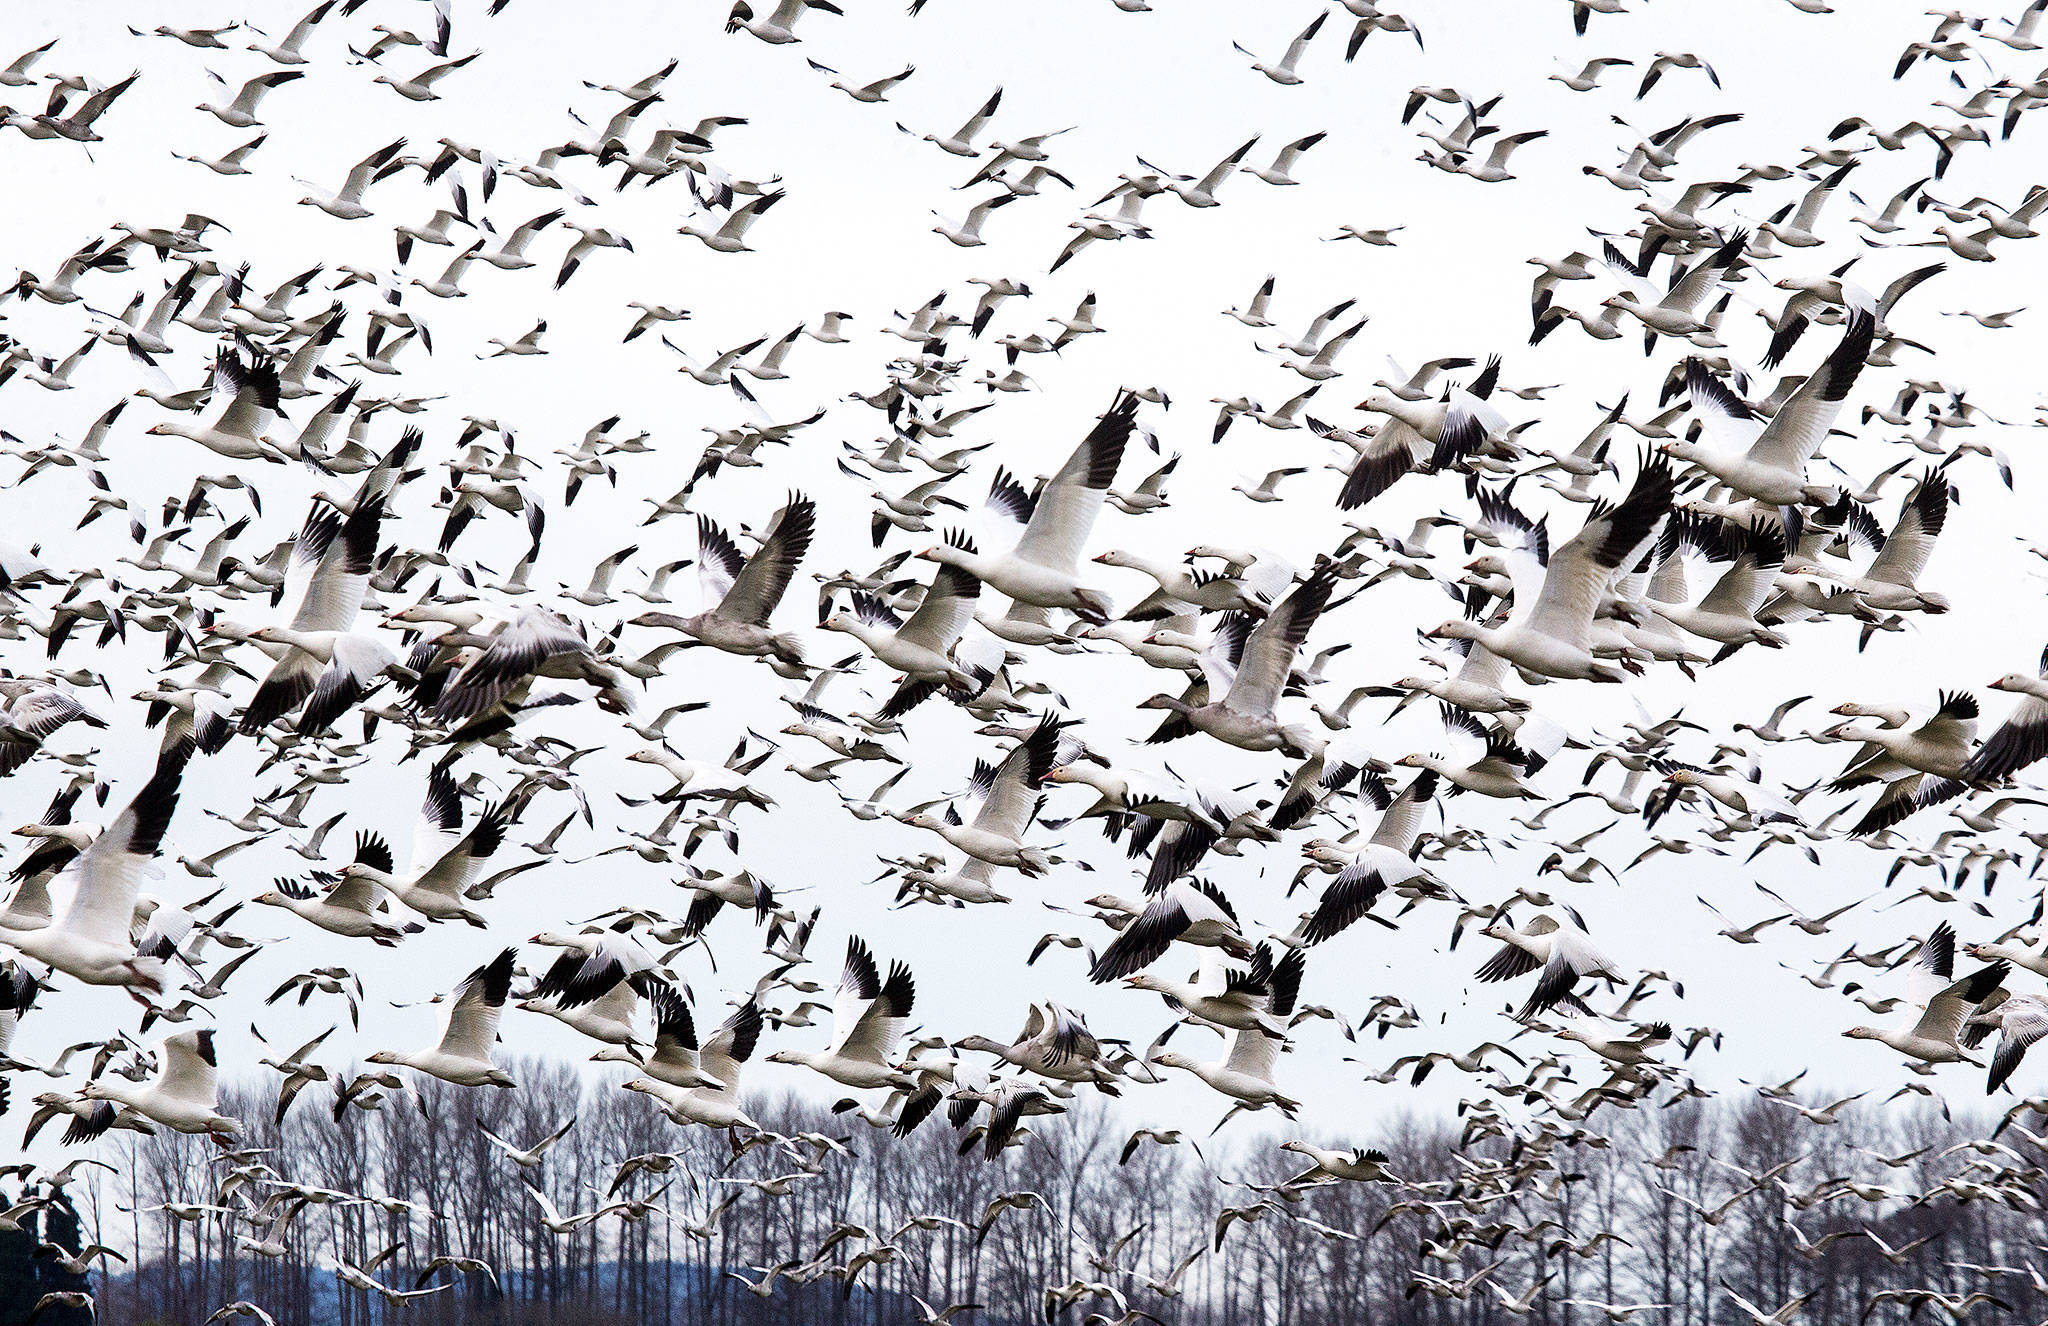 A flock of Snow geese take to the air along the Conway Frontage Road on Friday, Jan. 11, 2019 in Conway, Wa. (Andy Bronson / The Herald)